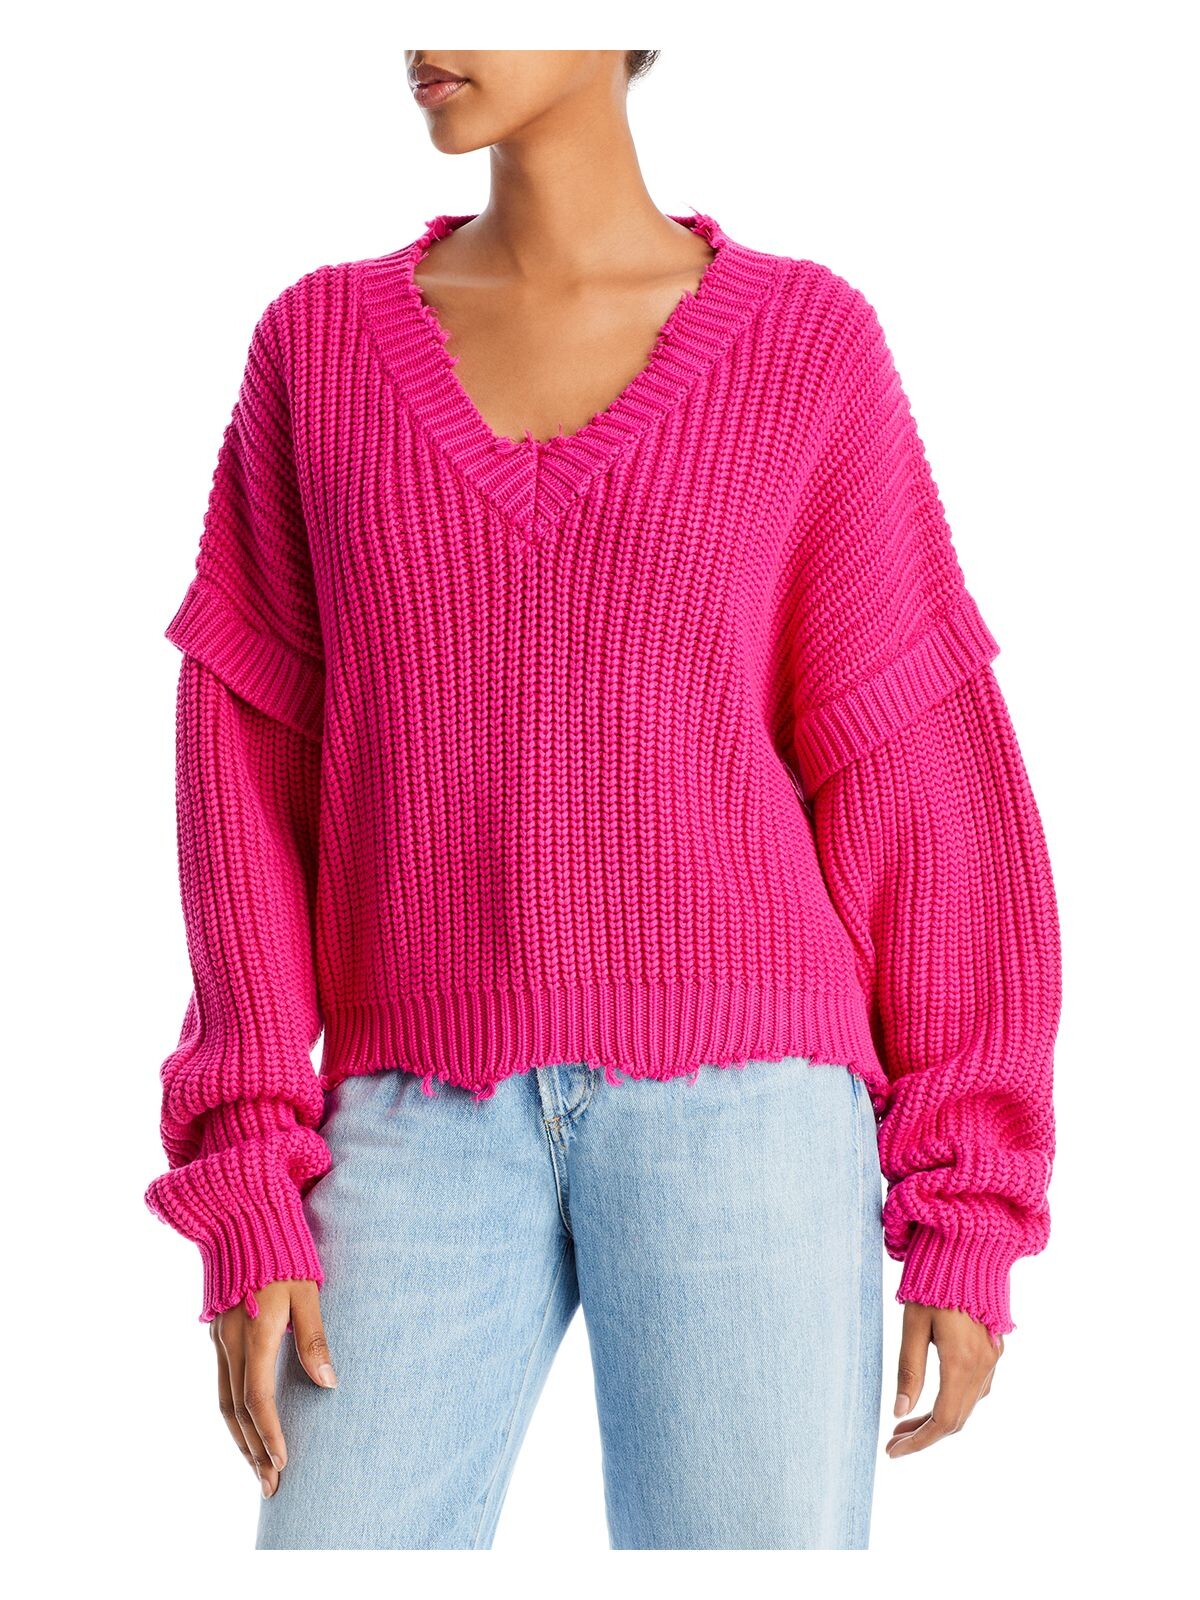 SIMON MILLER Womens Pink Distressed Ribbed Long Sleeve V Neck Sweater XS